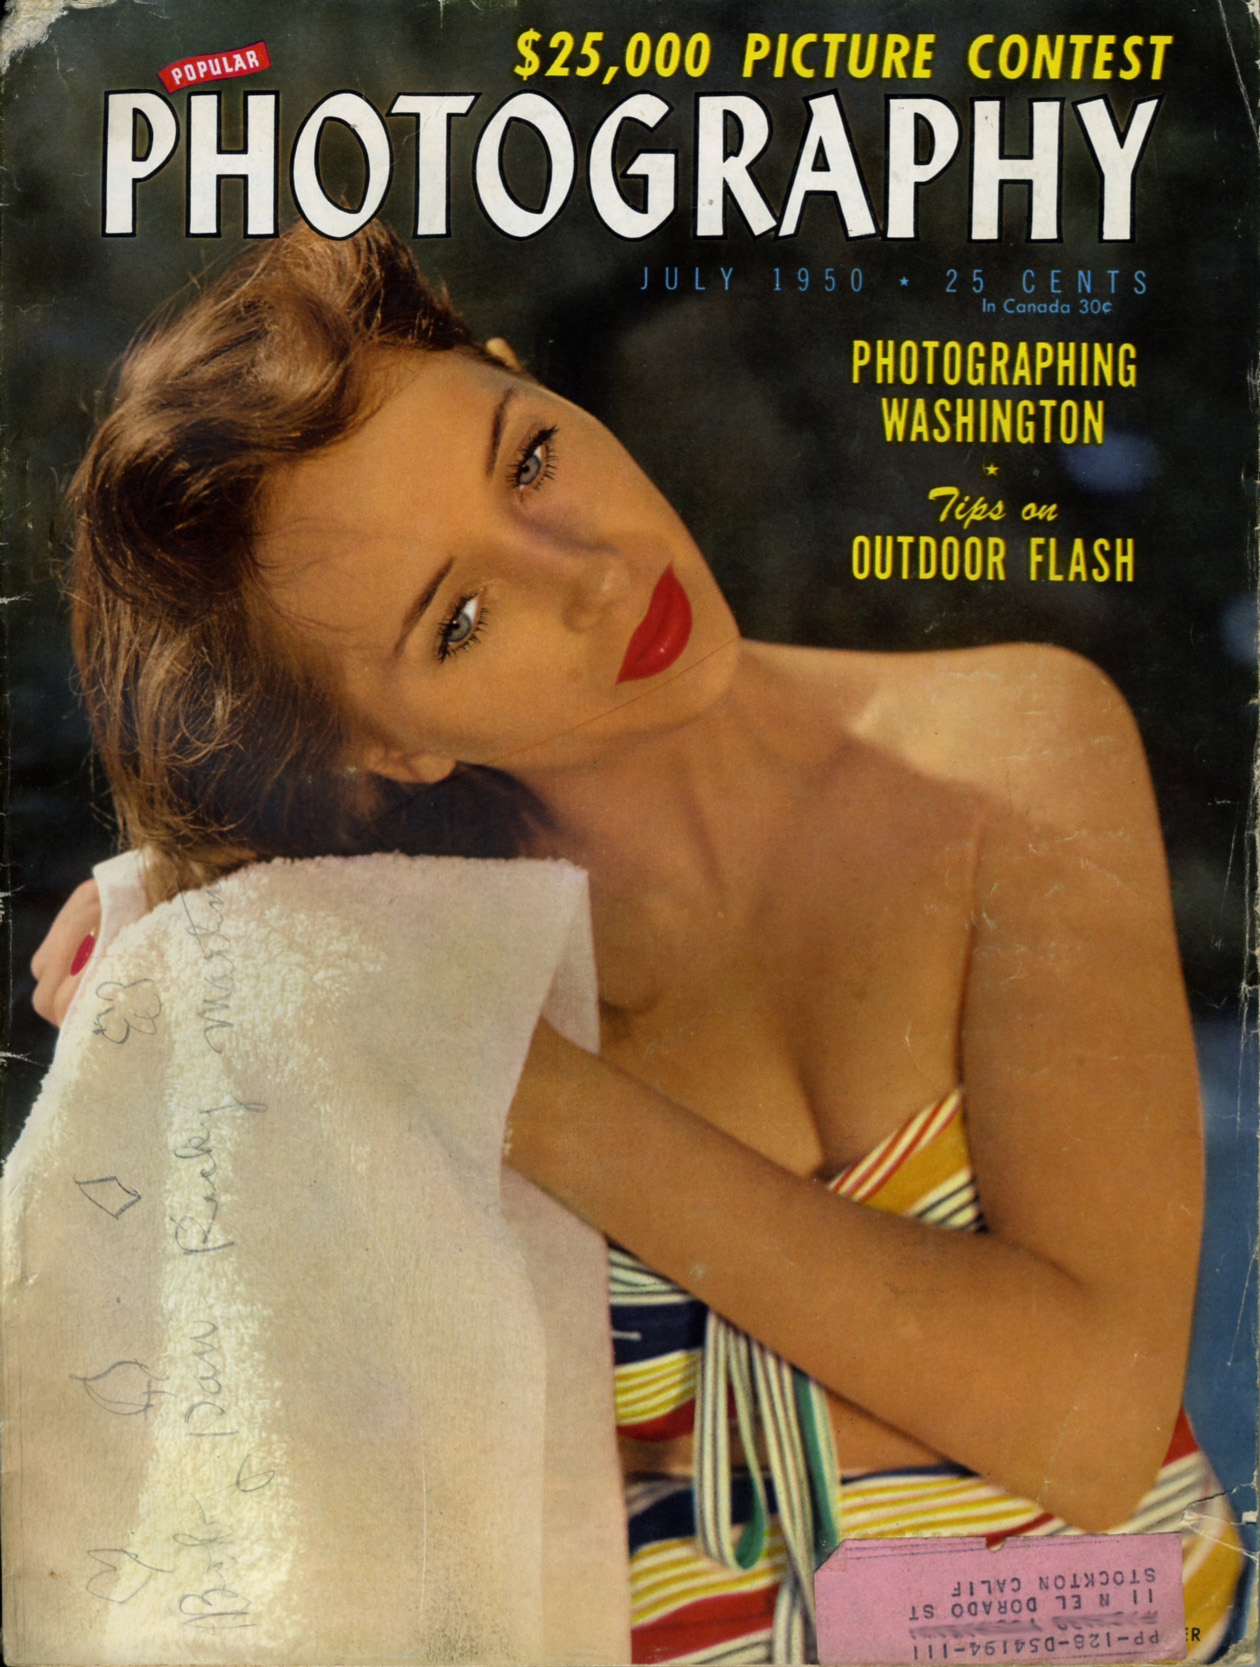 a woman wrapped in a towel while posing for a magazine